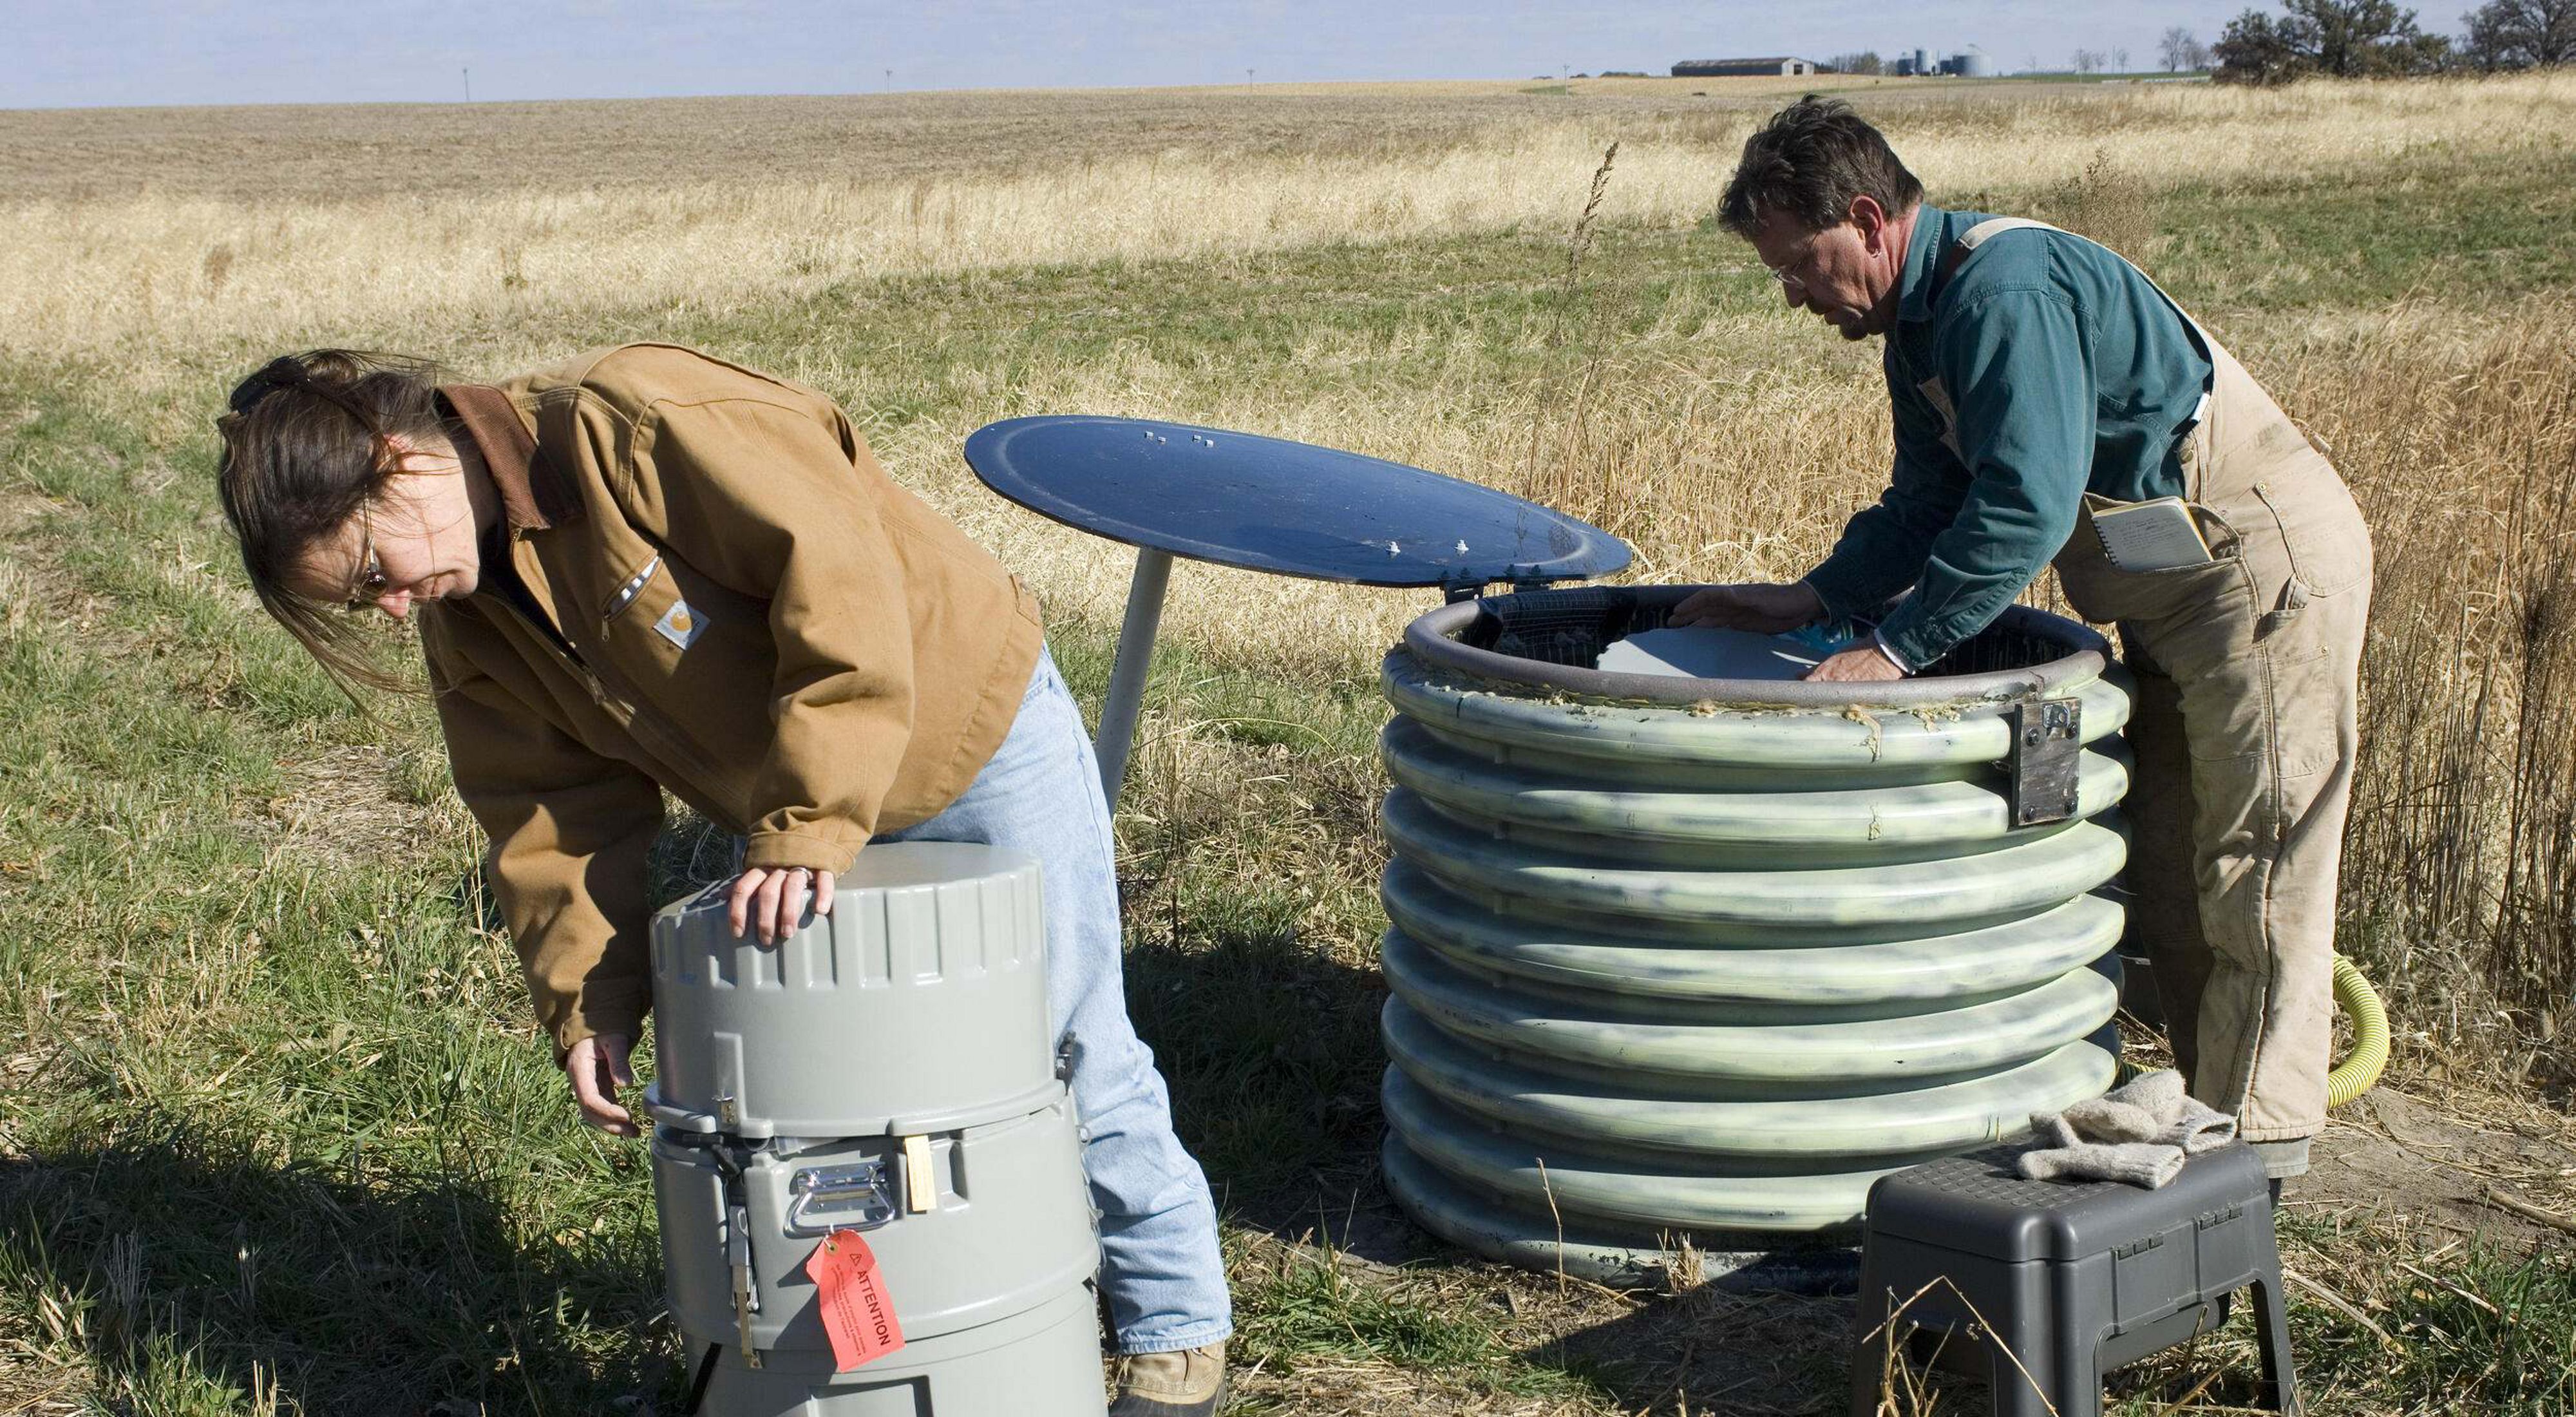 Two works inspect drum-like water monitoring devices in the middle of a farm field.